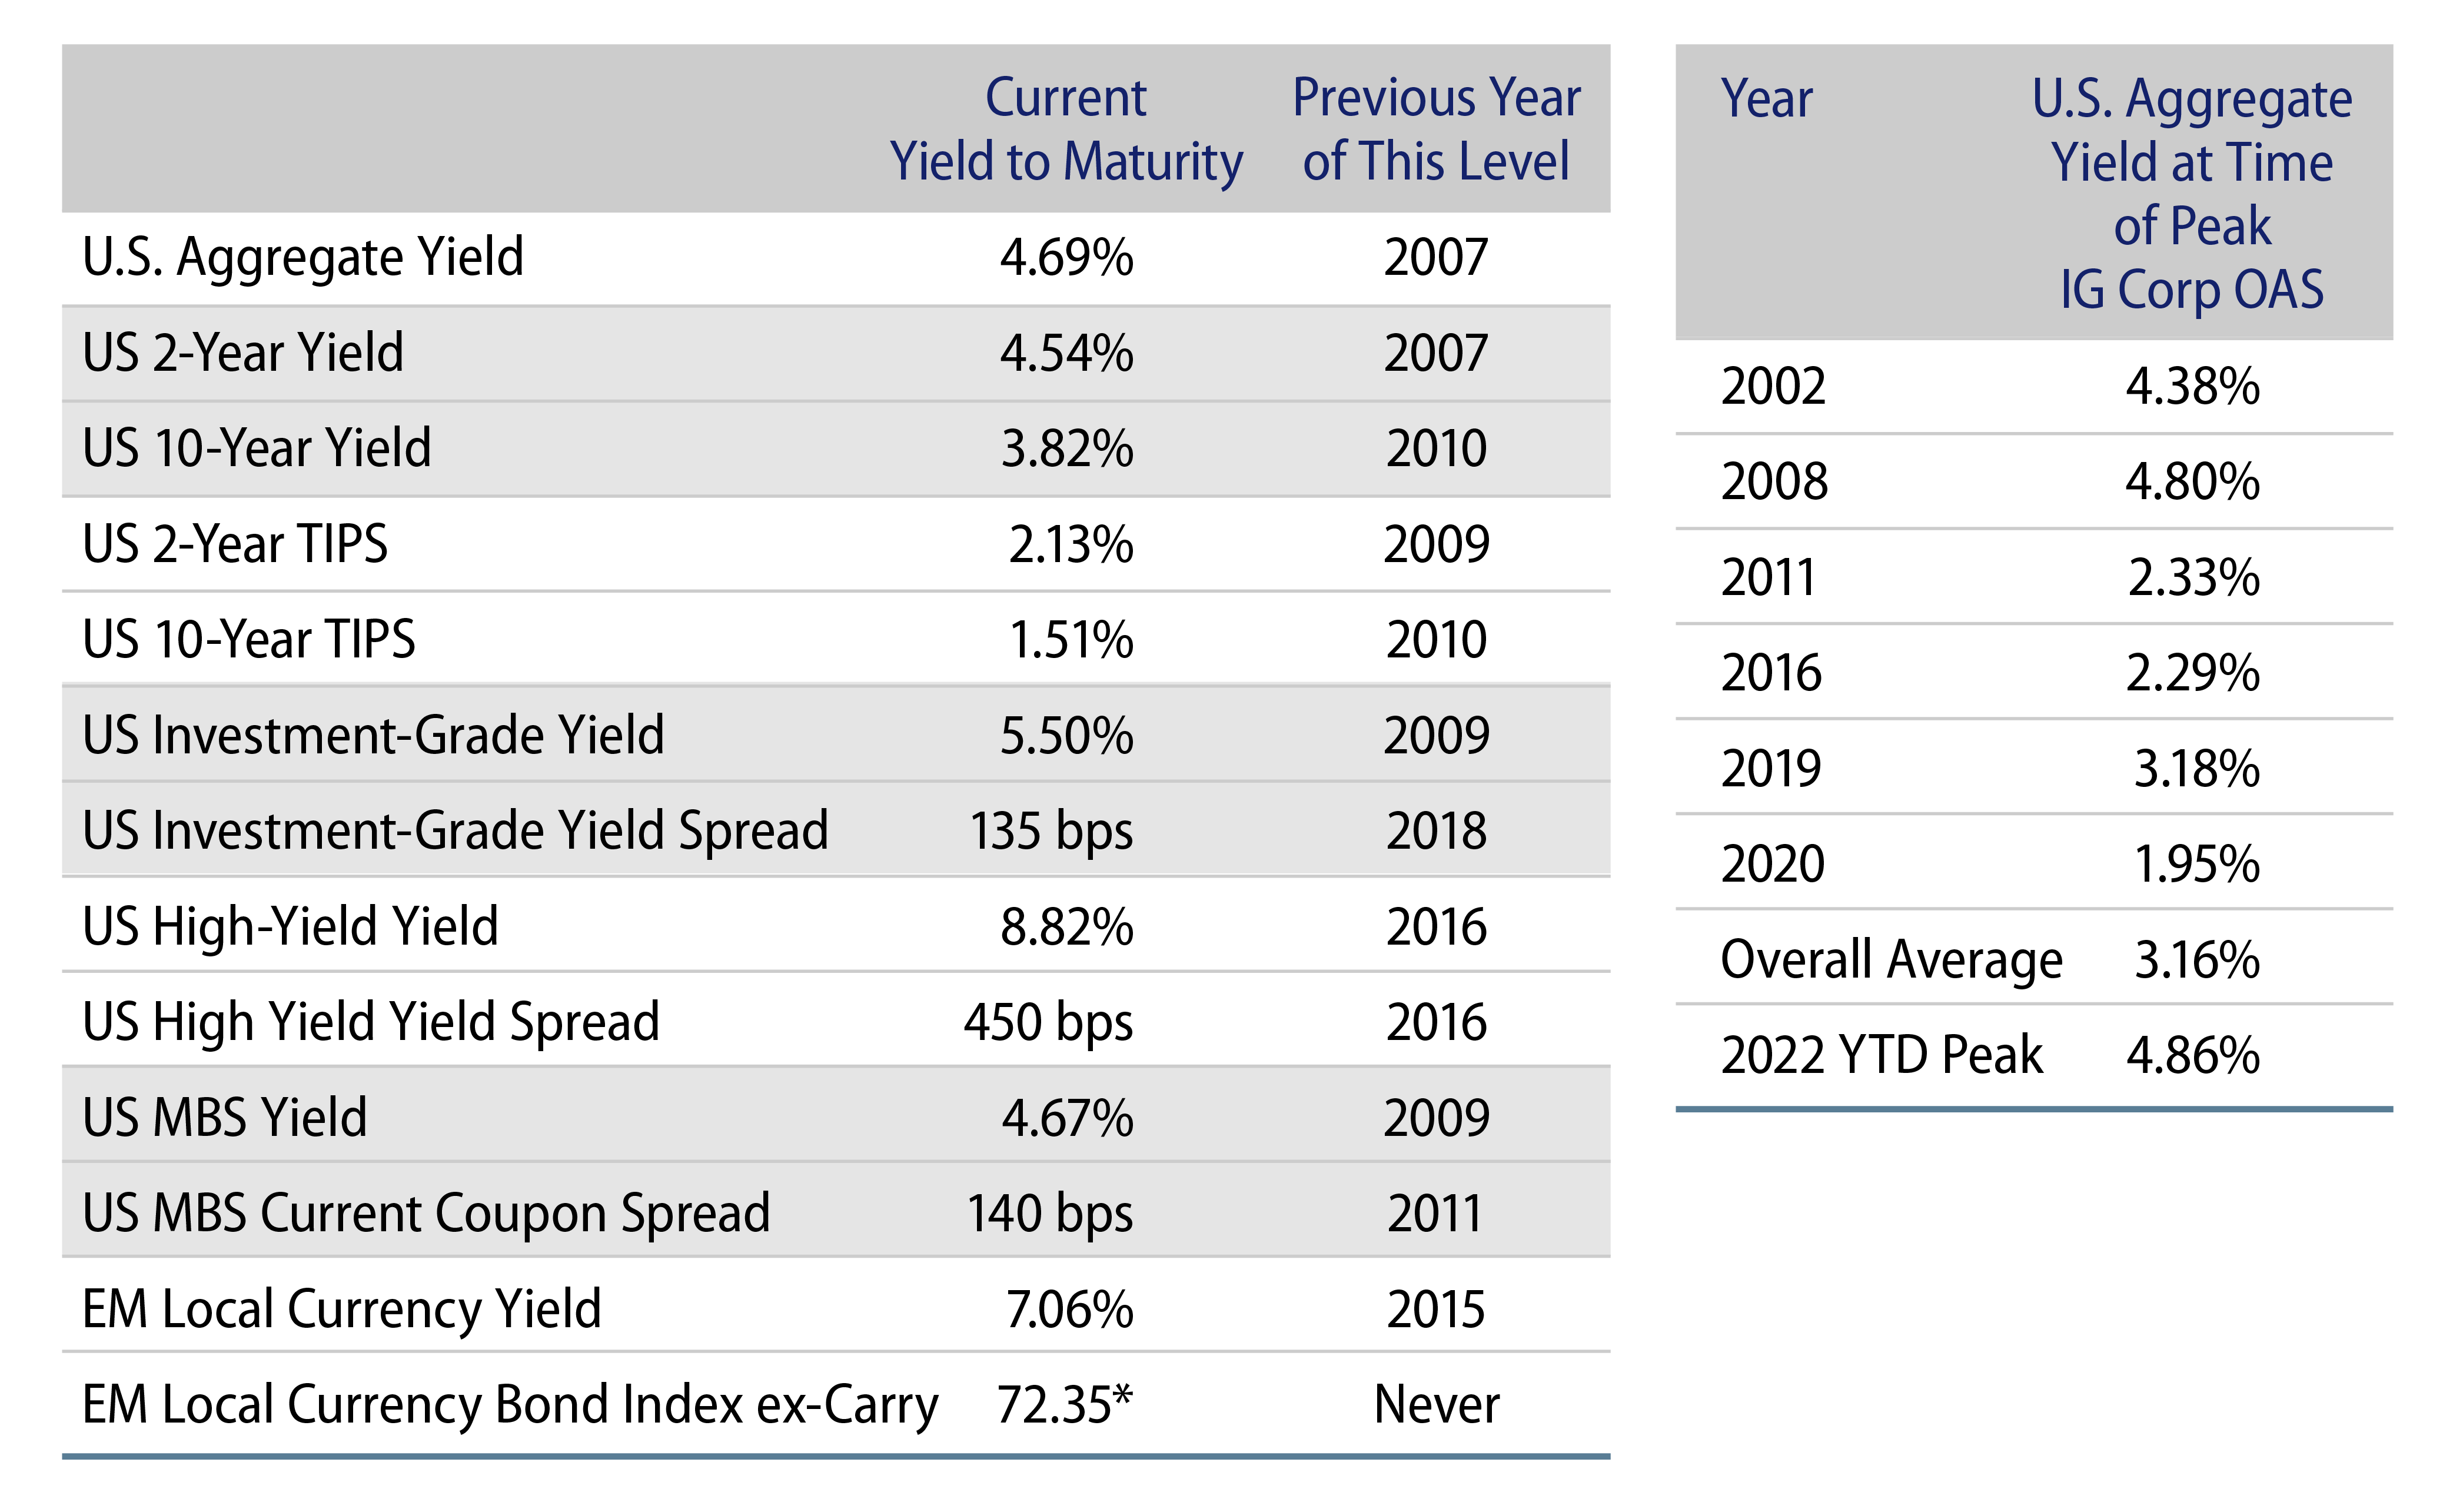 Yield and Spread Levels